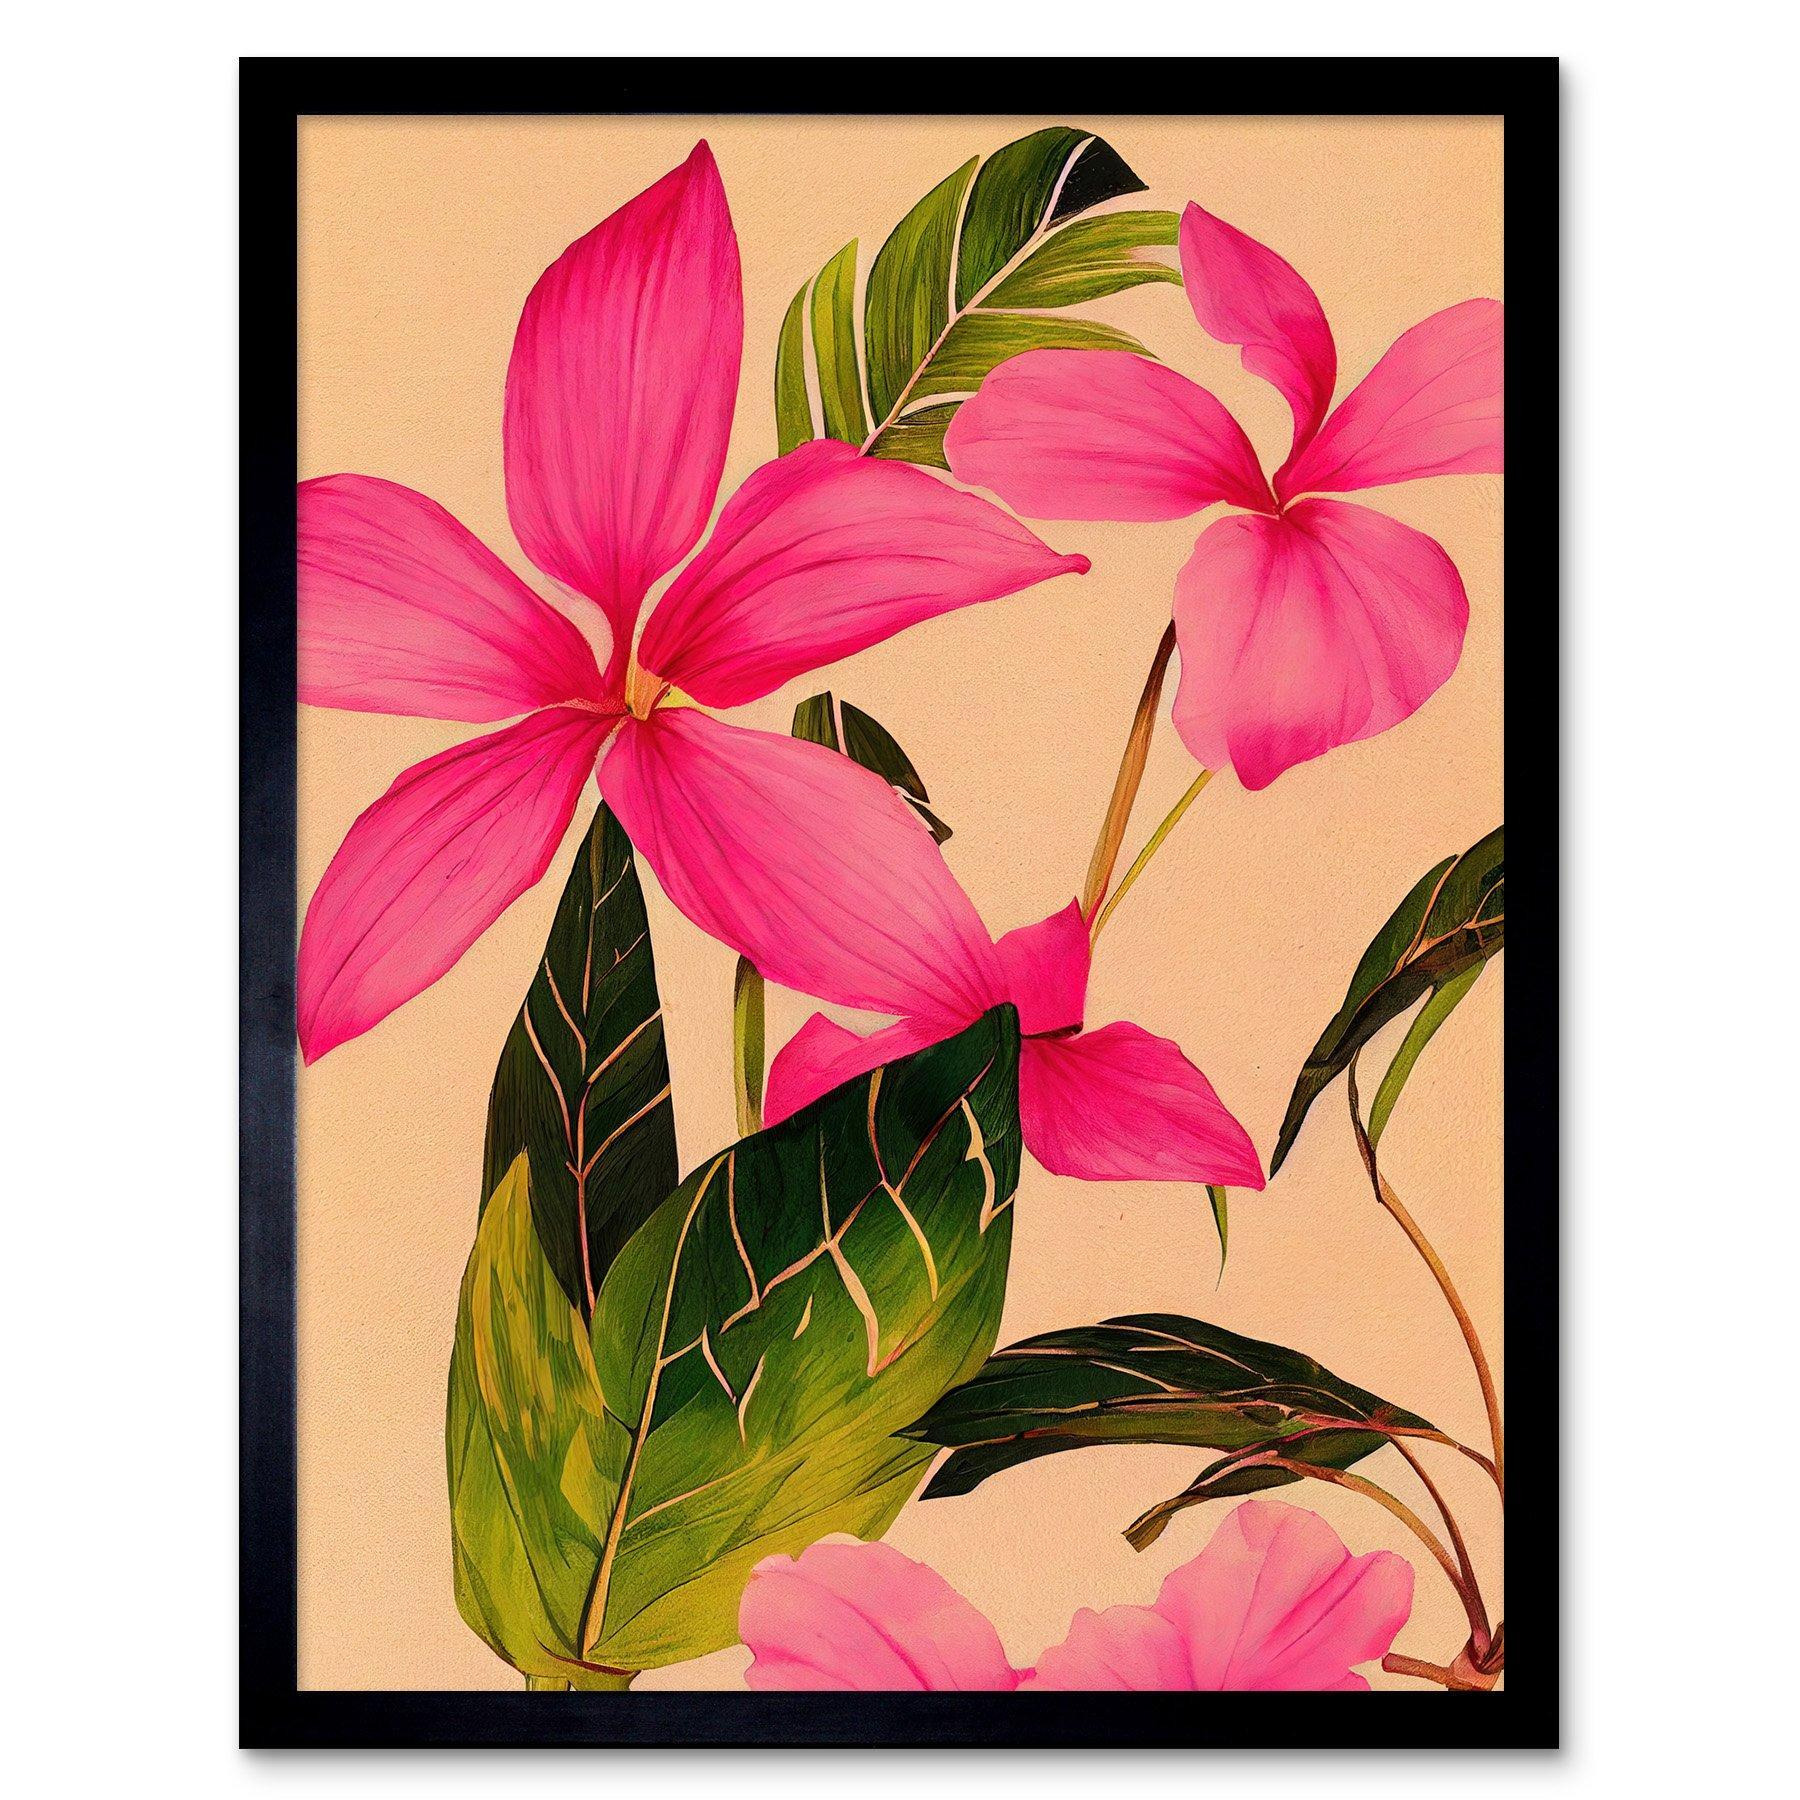 Exotic Pink Plumeria Flower Plant Blooms Watercolour Pencil Illustration Art Print Framed Poster Wall Decor 12x16 inch - image 1